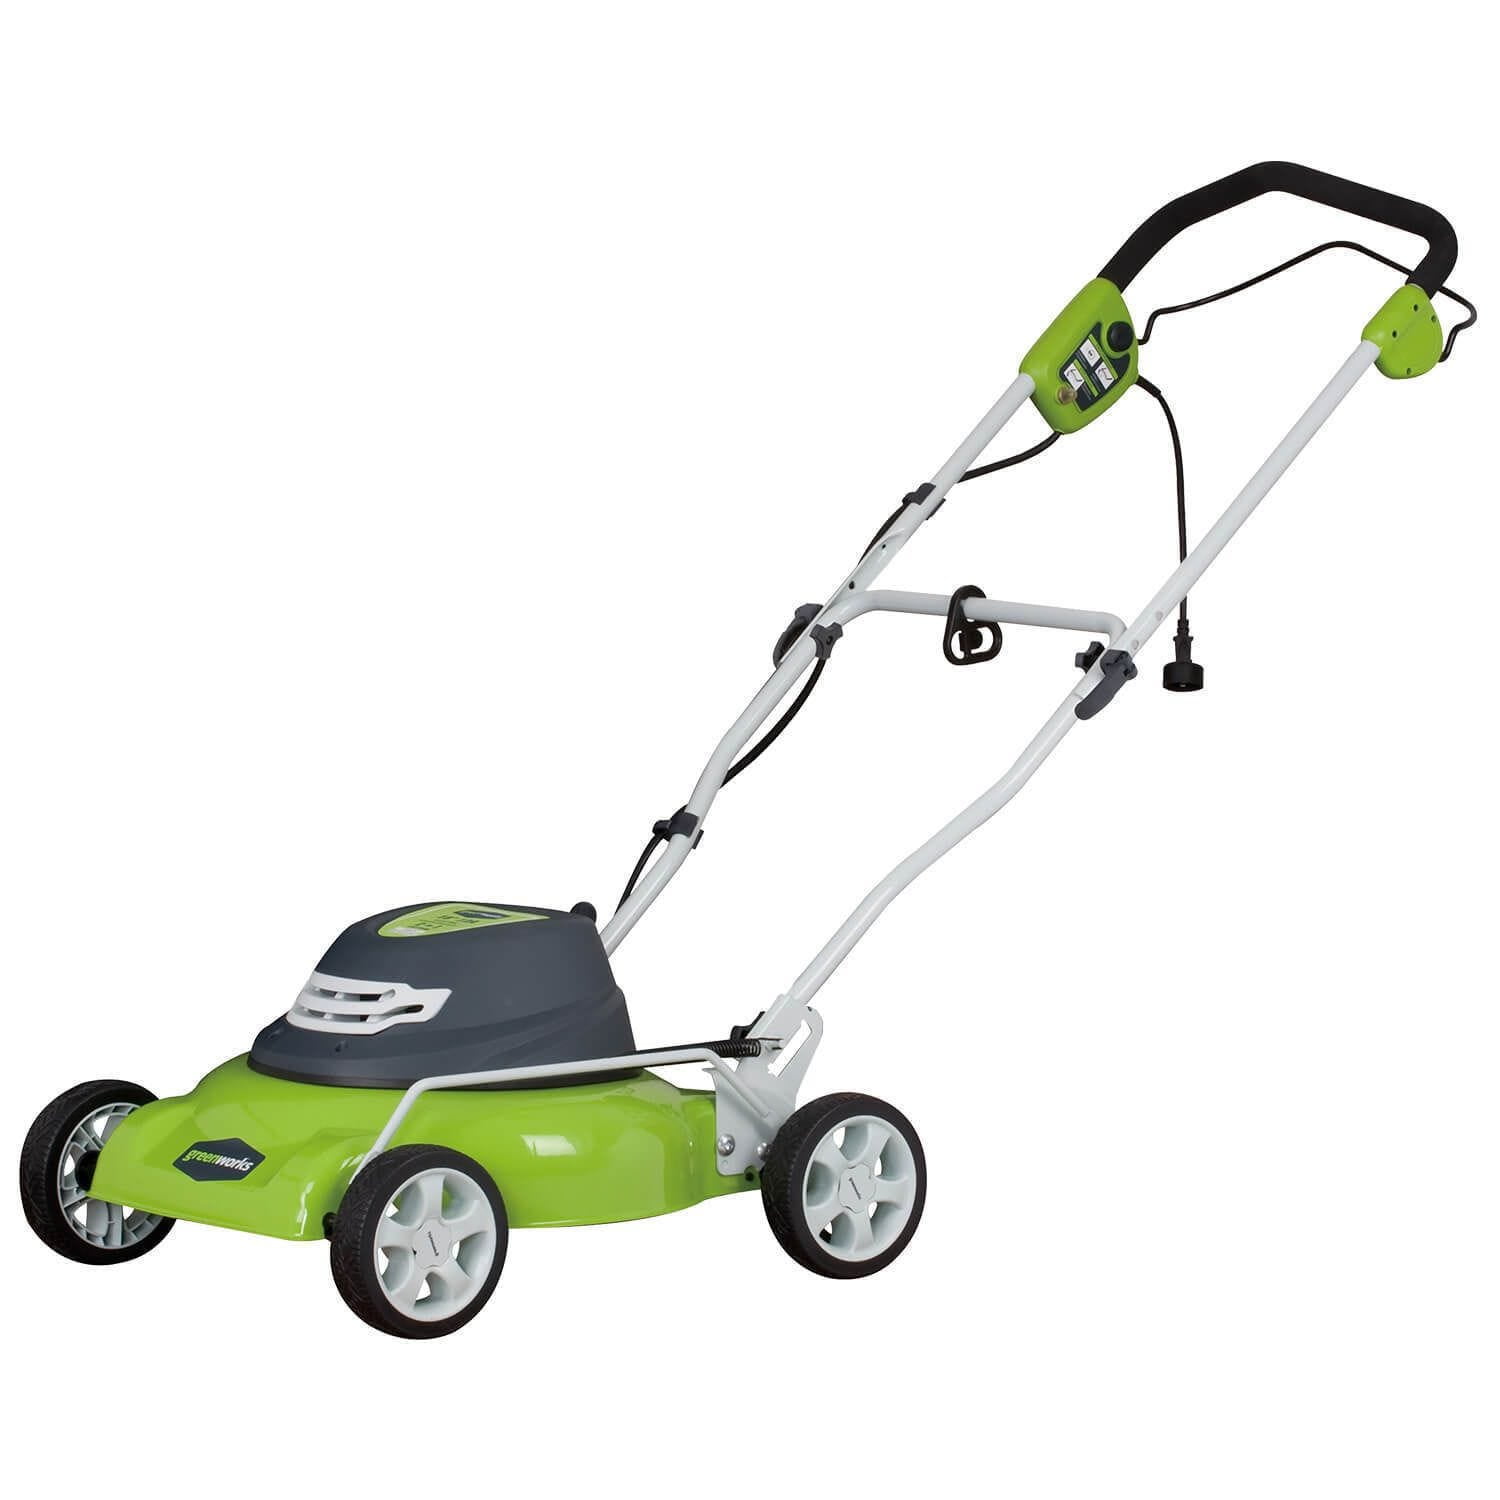 Greenworks 12 Amp 20-Inch 3-in-1Electric Corded Lawn Mower, 25022 -  AliExpress